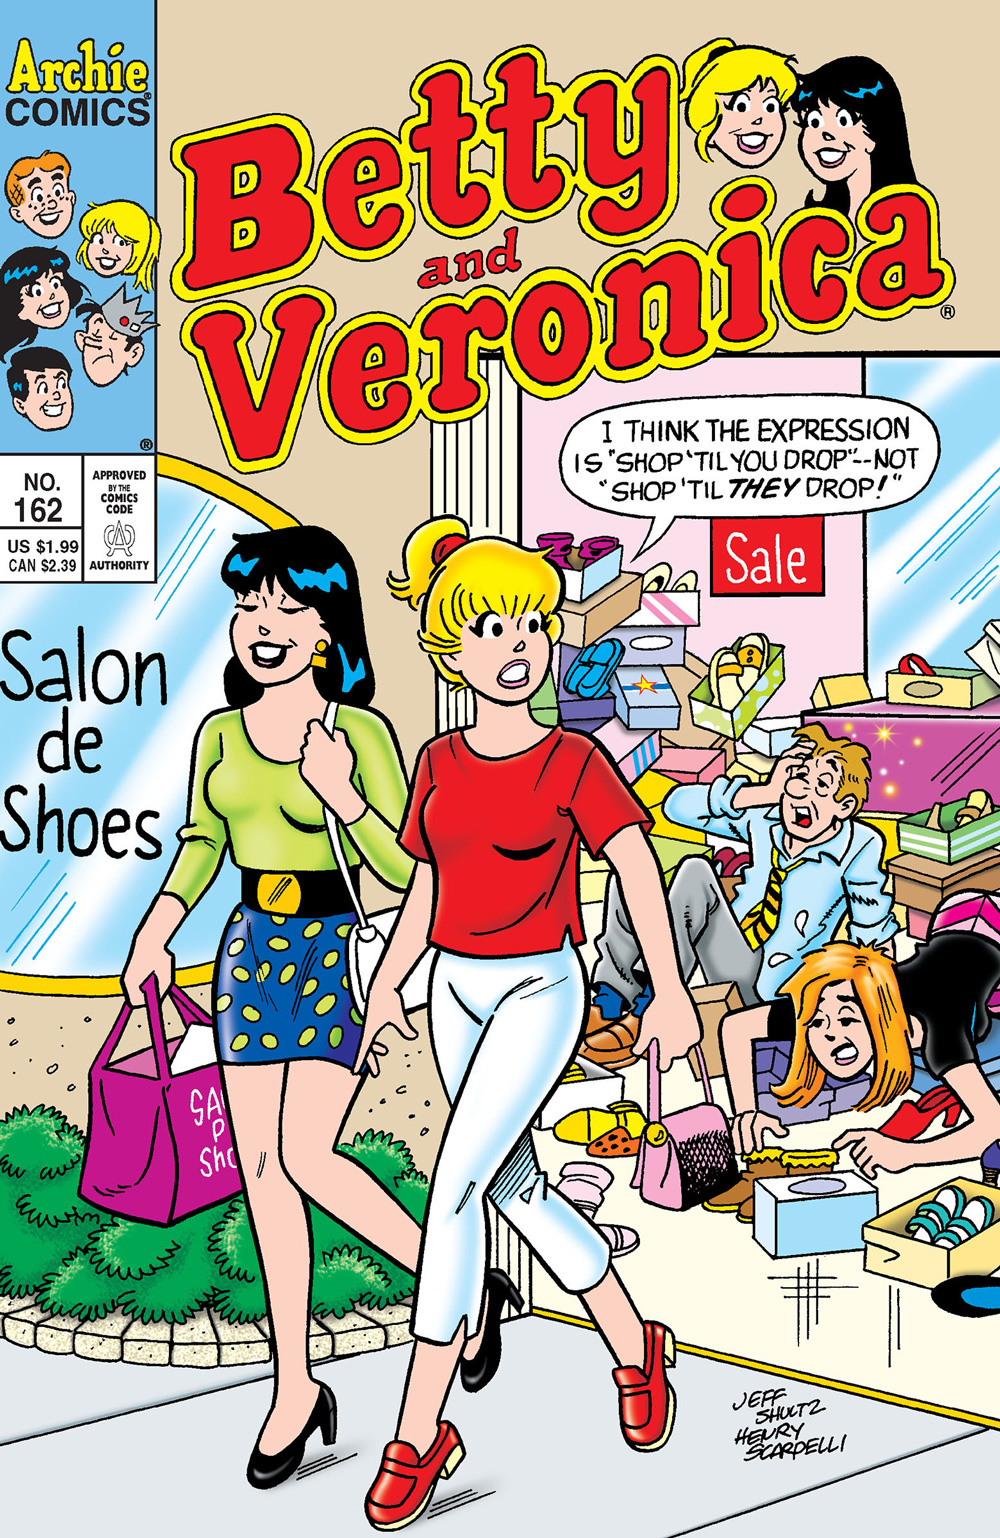 Betty and Veronica leave a shoe store with exhausted shopkeepers laying on the floor in a mess of boxes behind them. Betty says they shopped until they dropped.